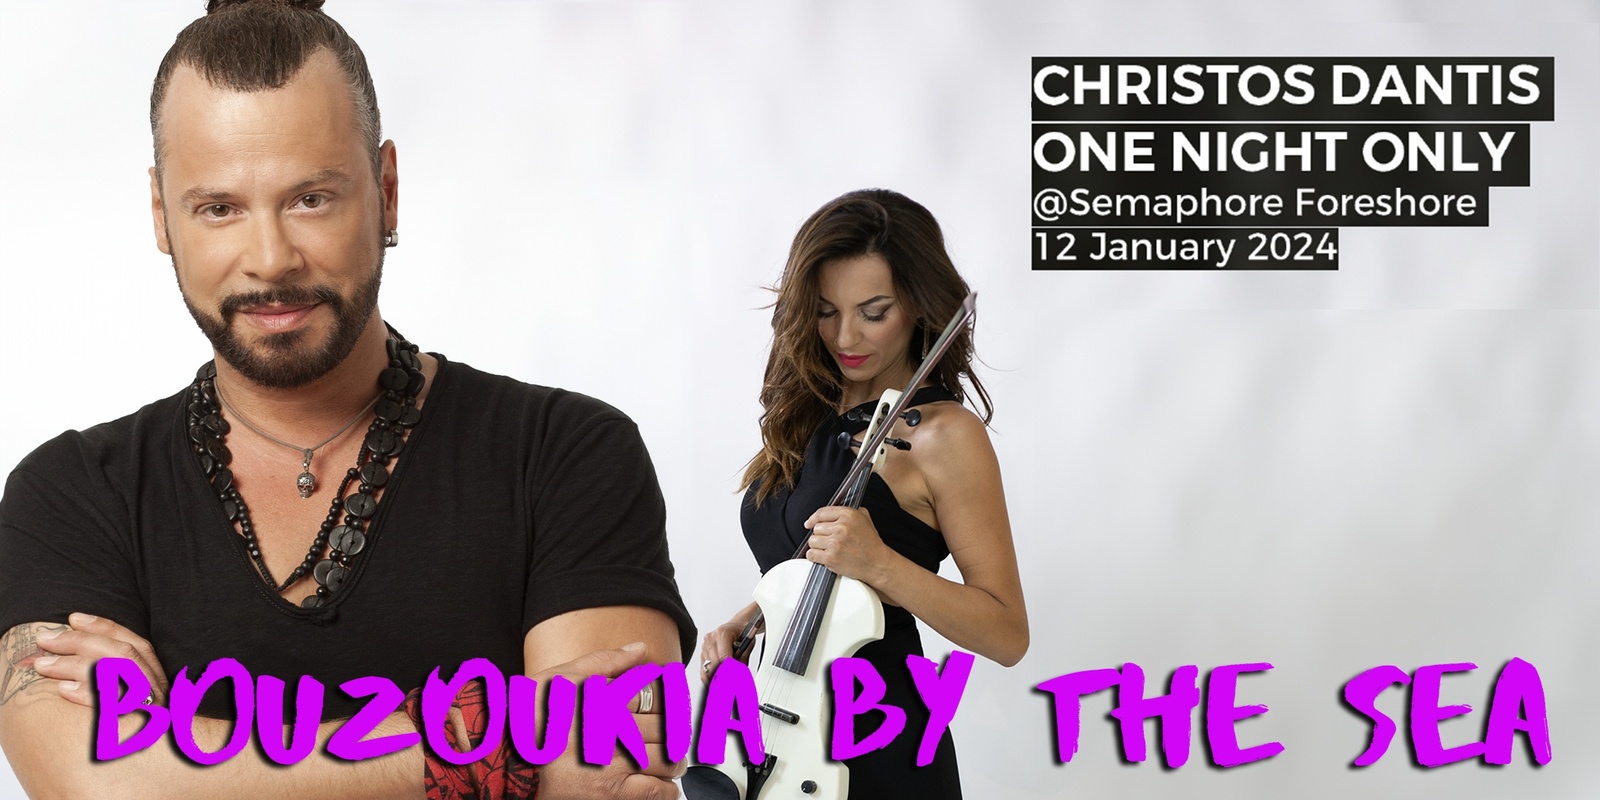 Banner image for Bouzoukia by the Sea. One night only in Adelaide, Christos Dantis!